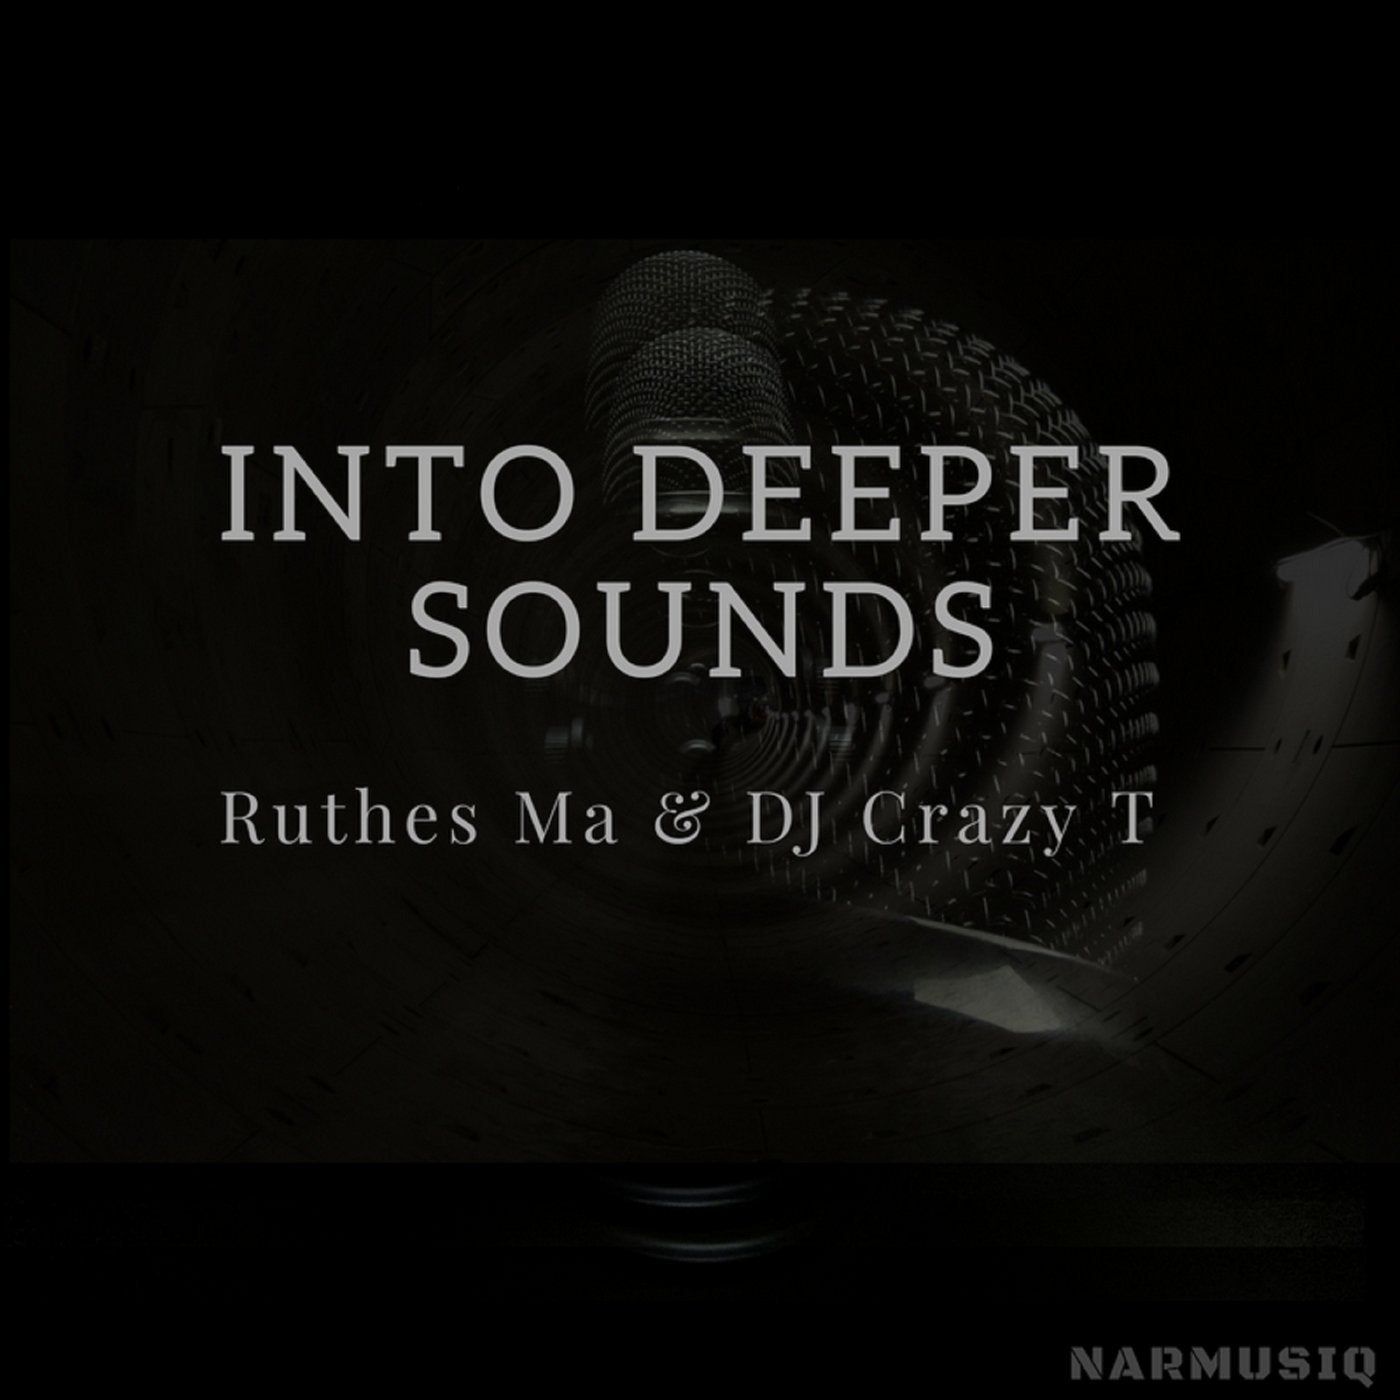 Into Deeper Sounds